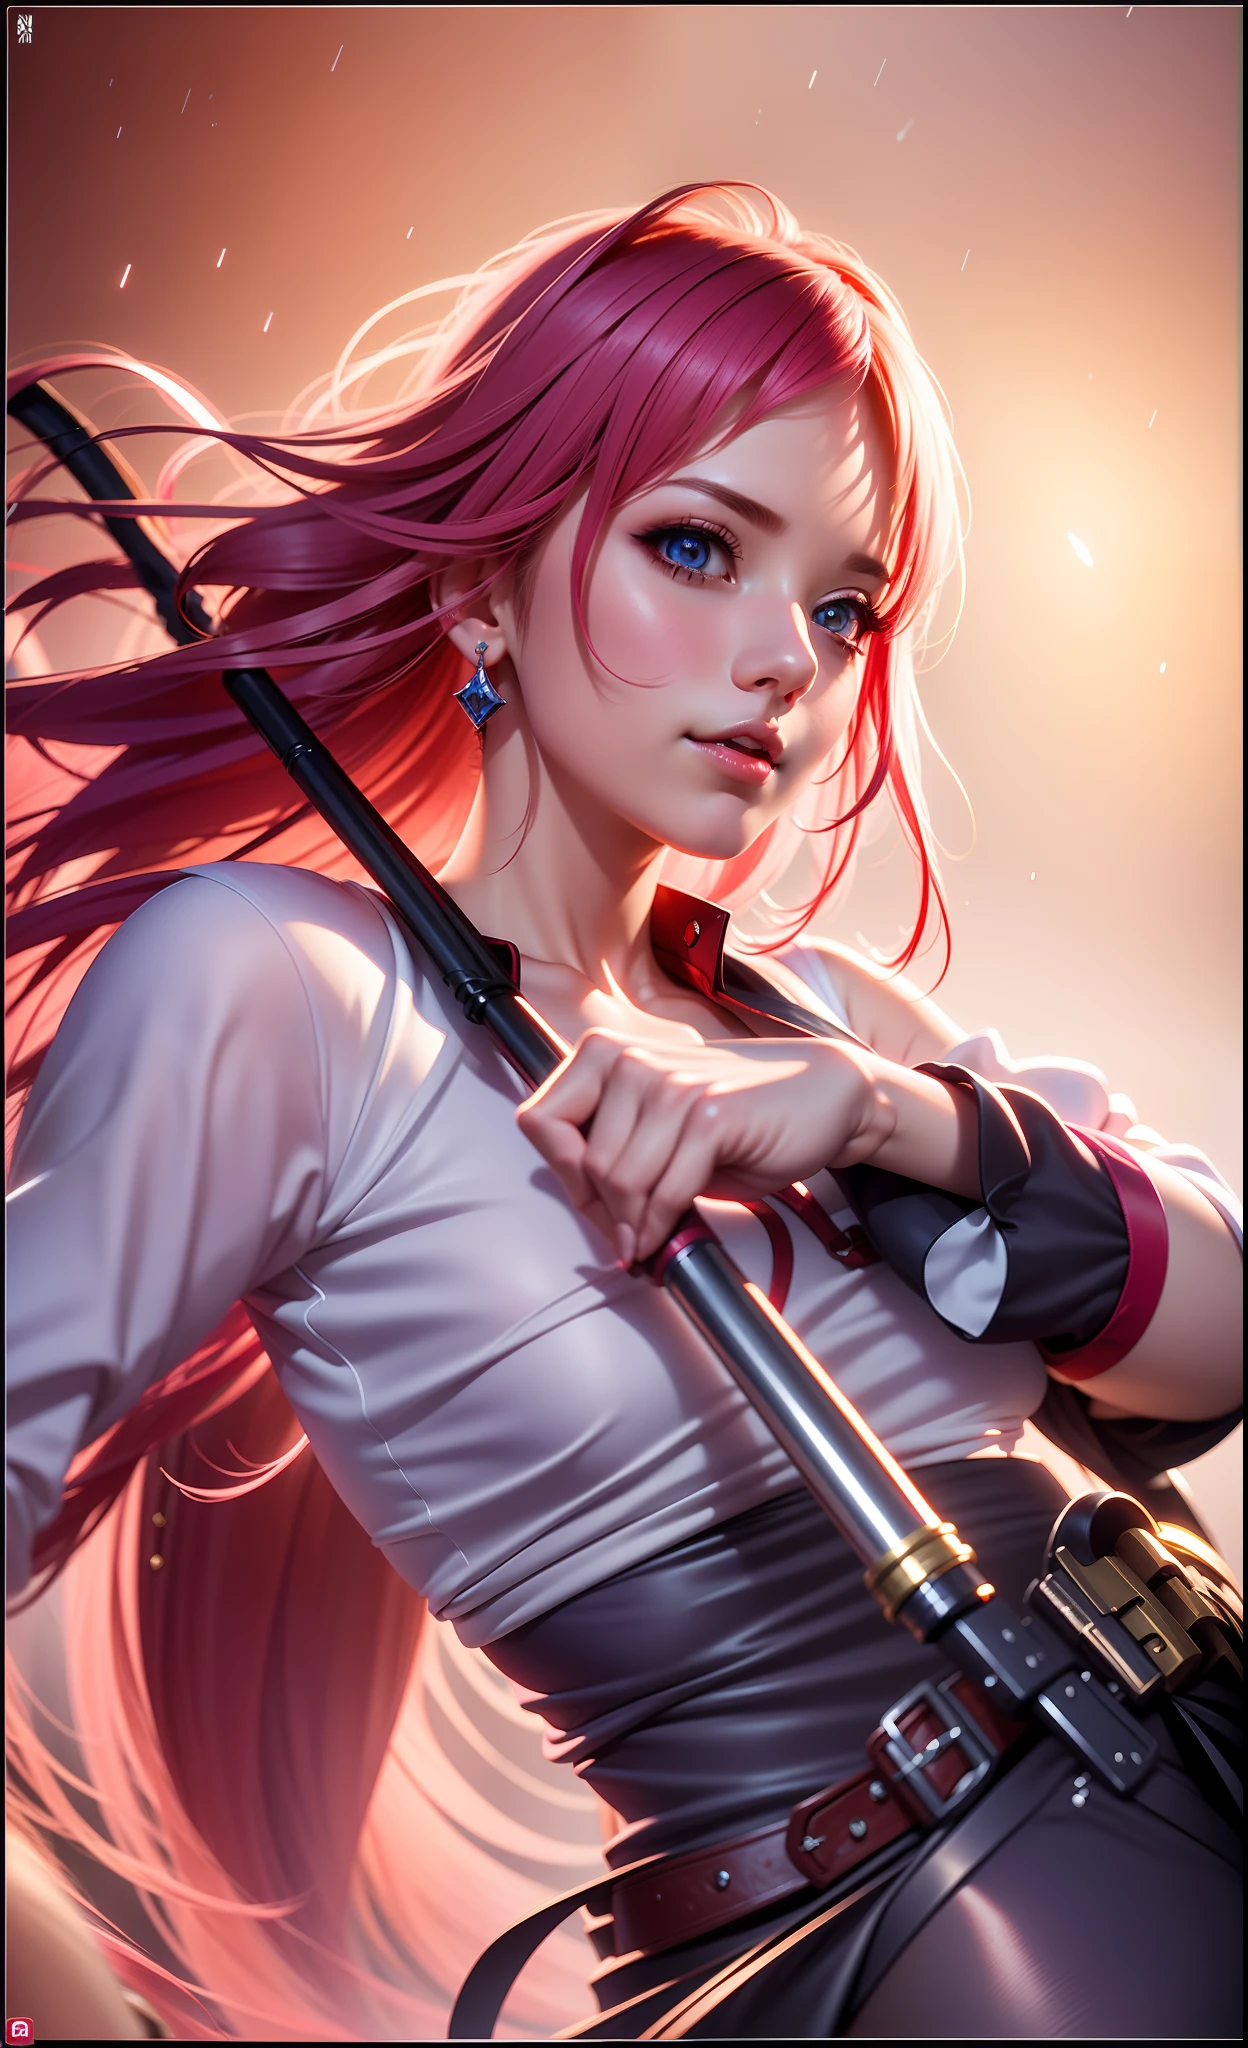 ((8k Resolution)), ((Character)), ((Mobile Legend)) 1Girl,20y.o, Kagura, Character, Waite and red custom, Pink Hair, beautyfull girl,Red and waite Umbrella, Realistic Character, Realistic, Ultra Detail,